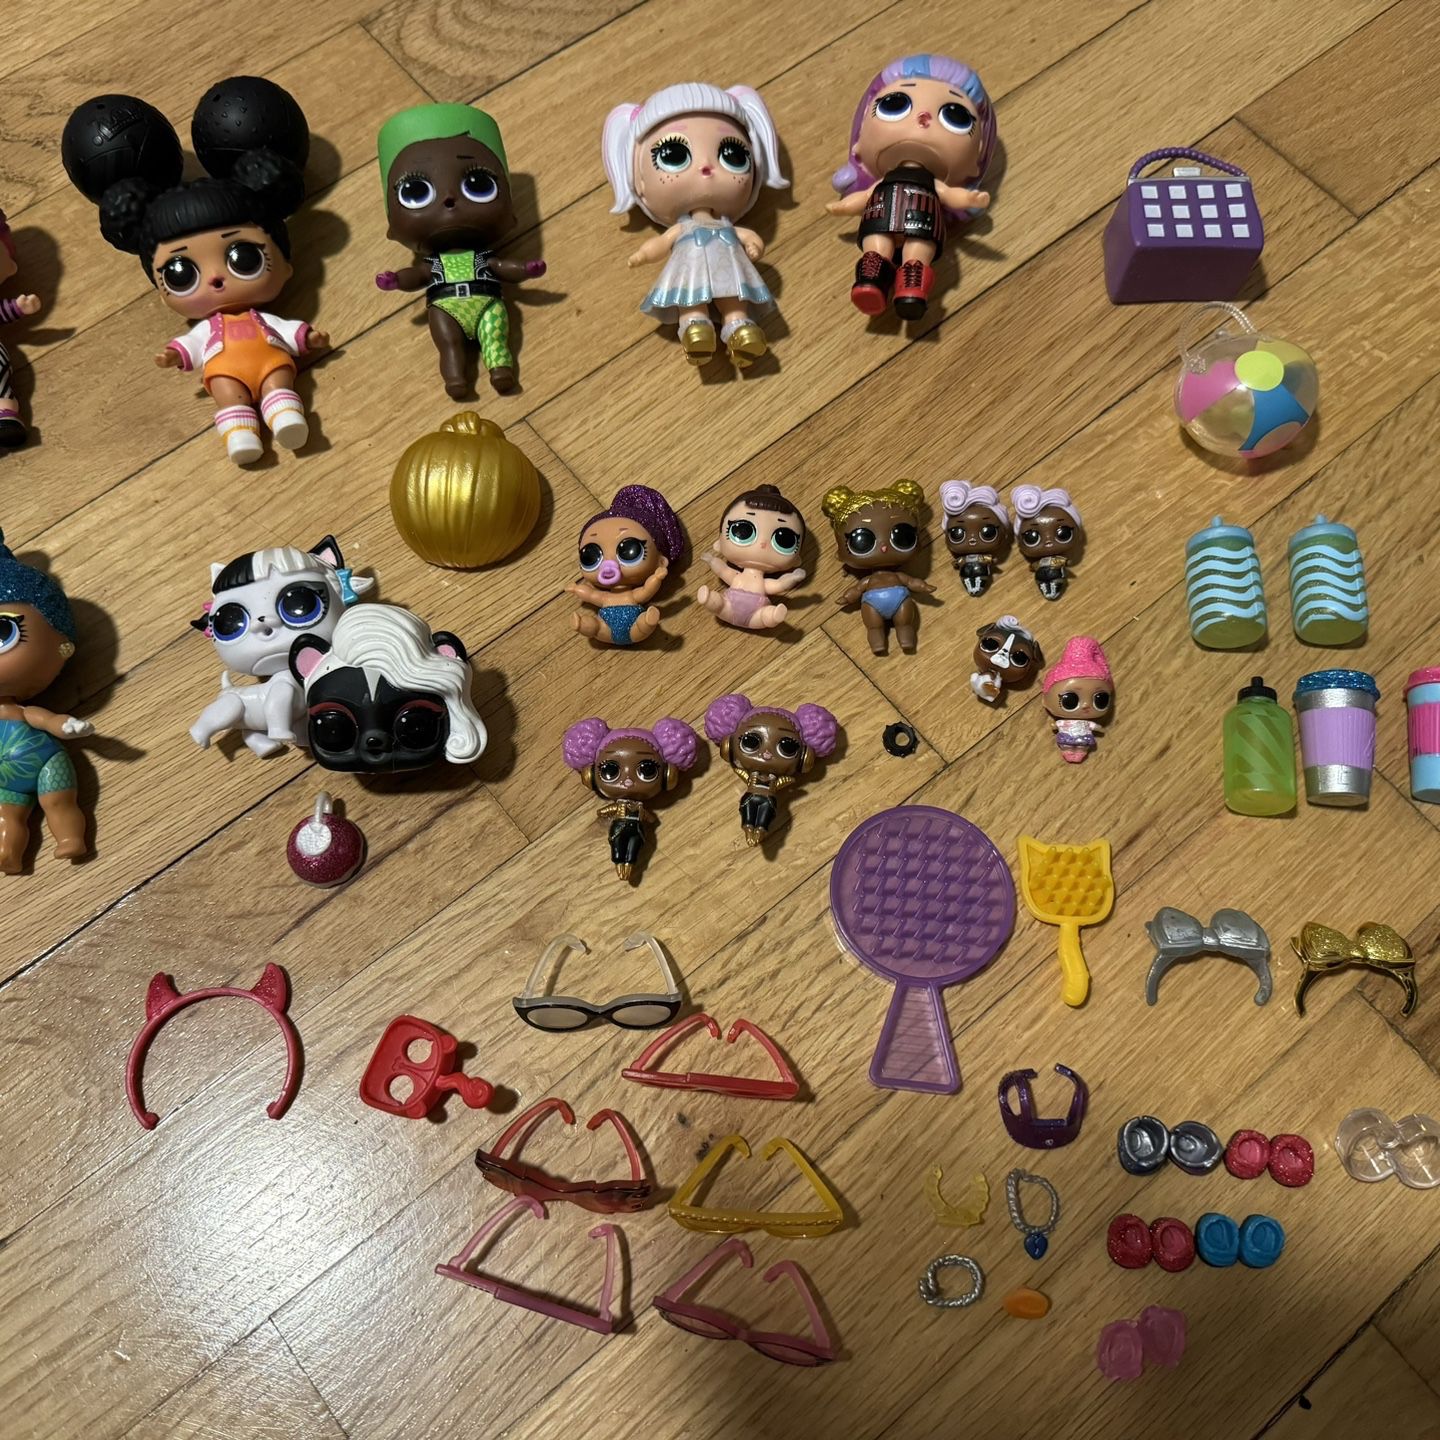 Lol dolls accessories empty cases and more All for $30